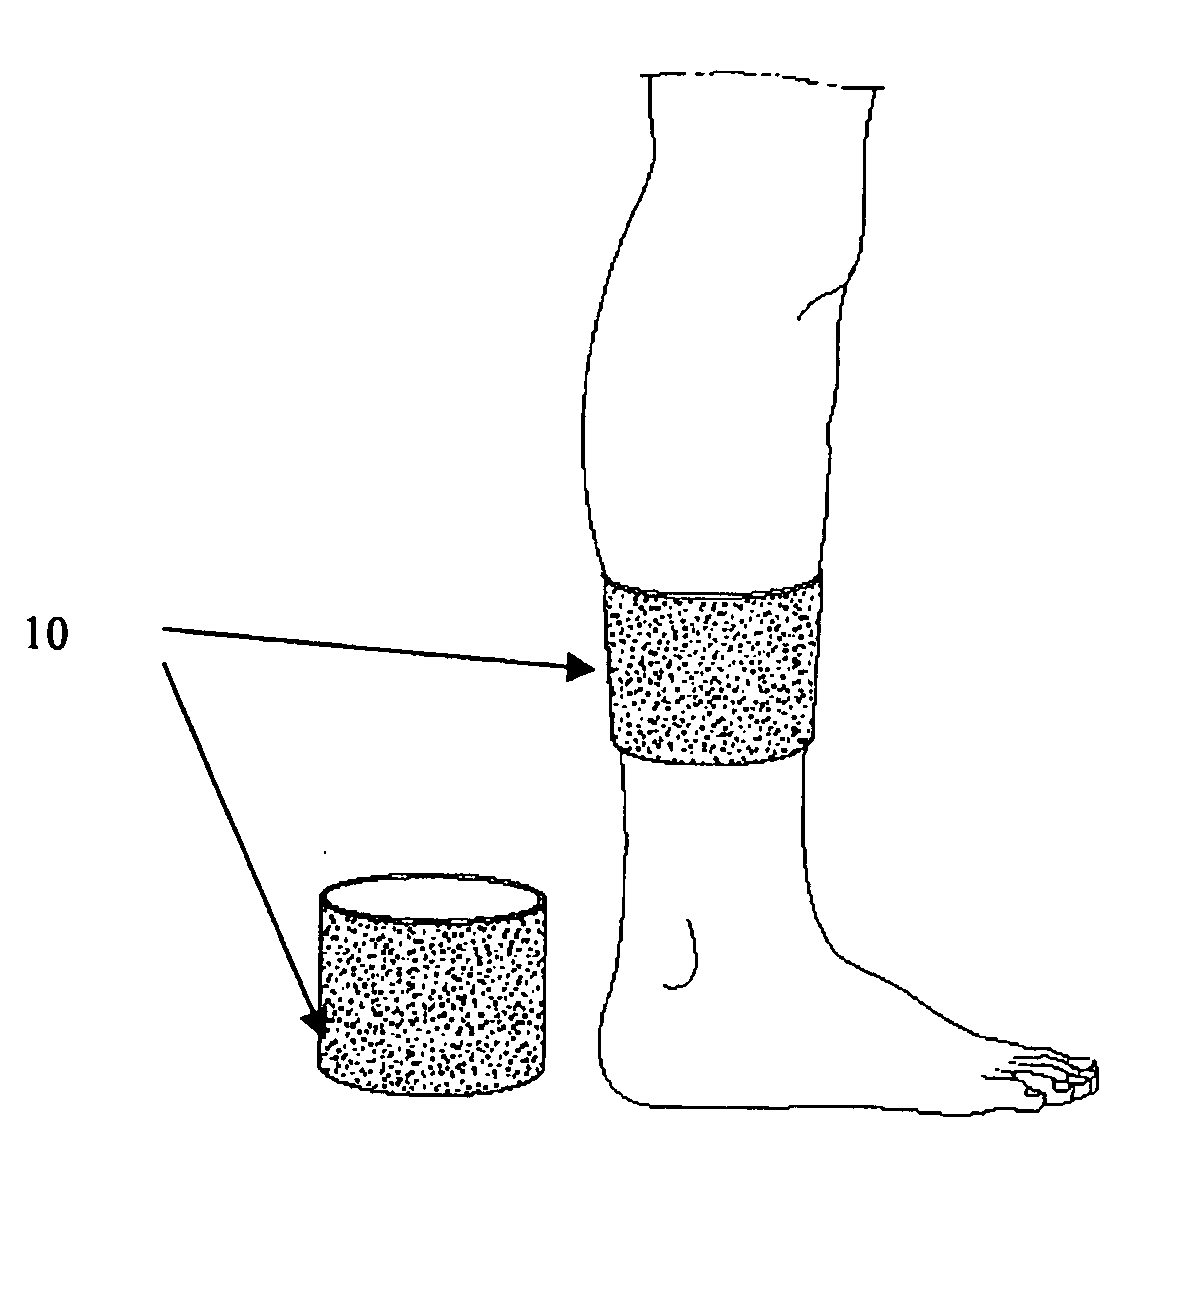 Device, method, and use for treatment of neuropathy involving nitric oxide